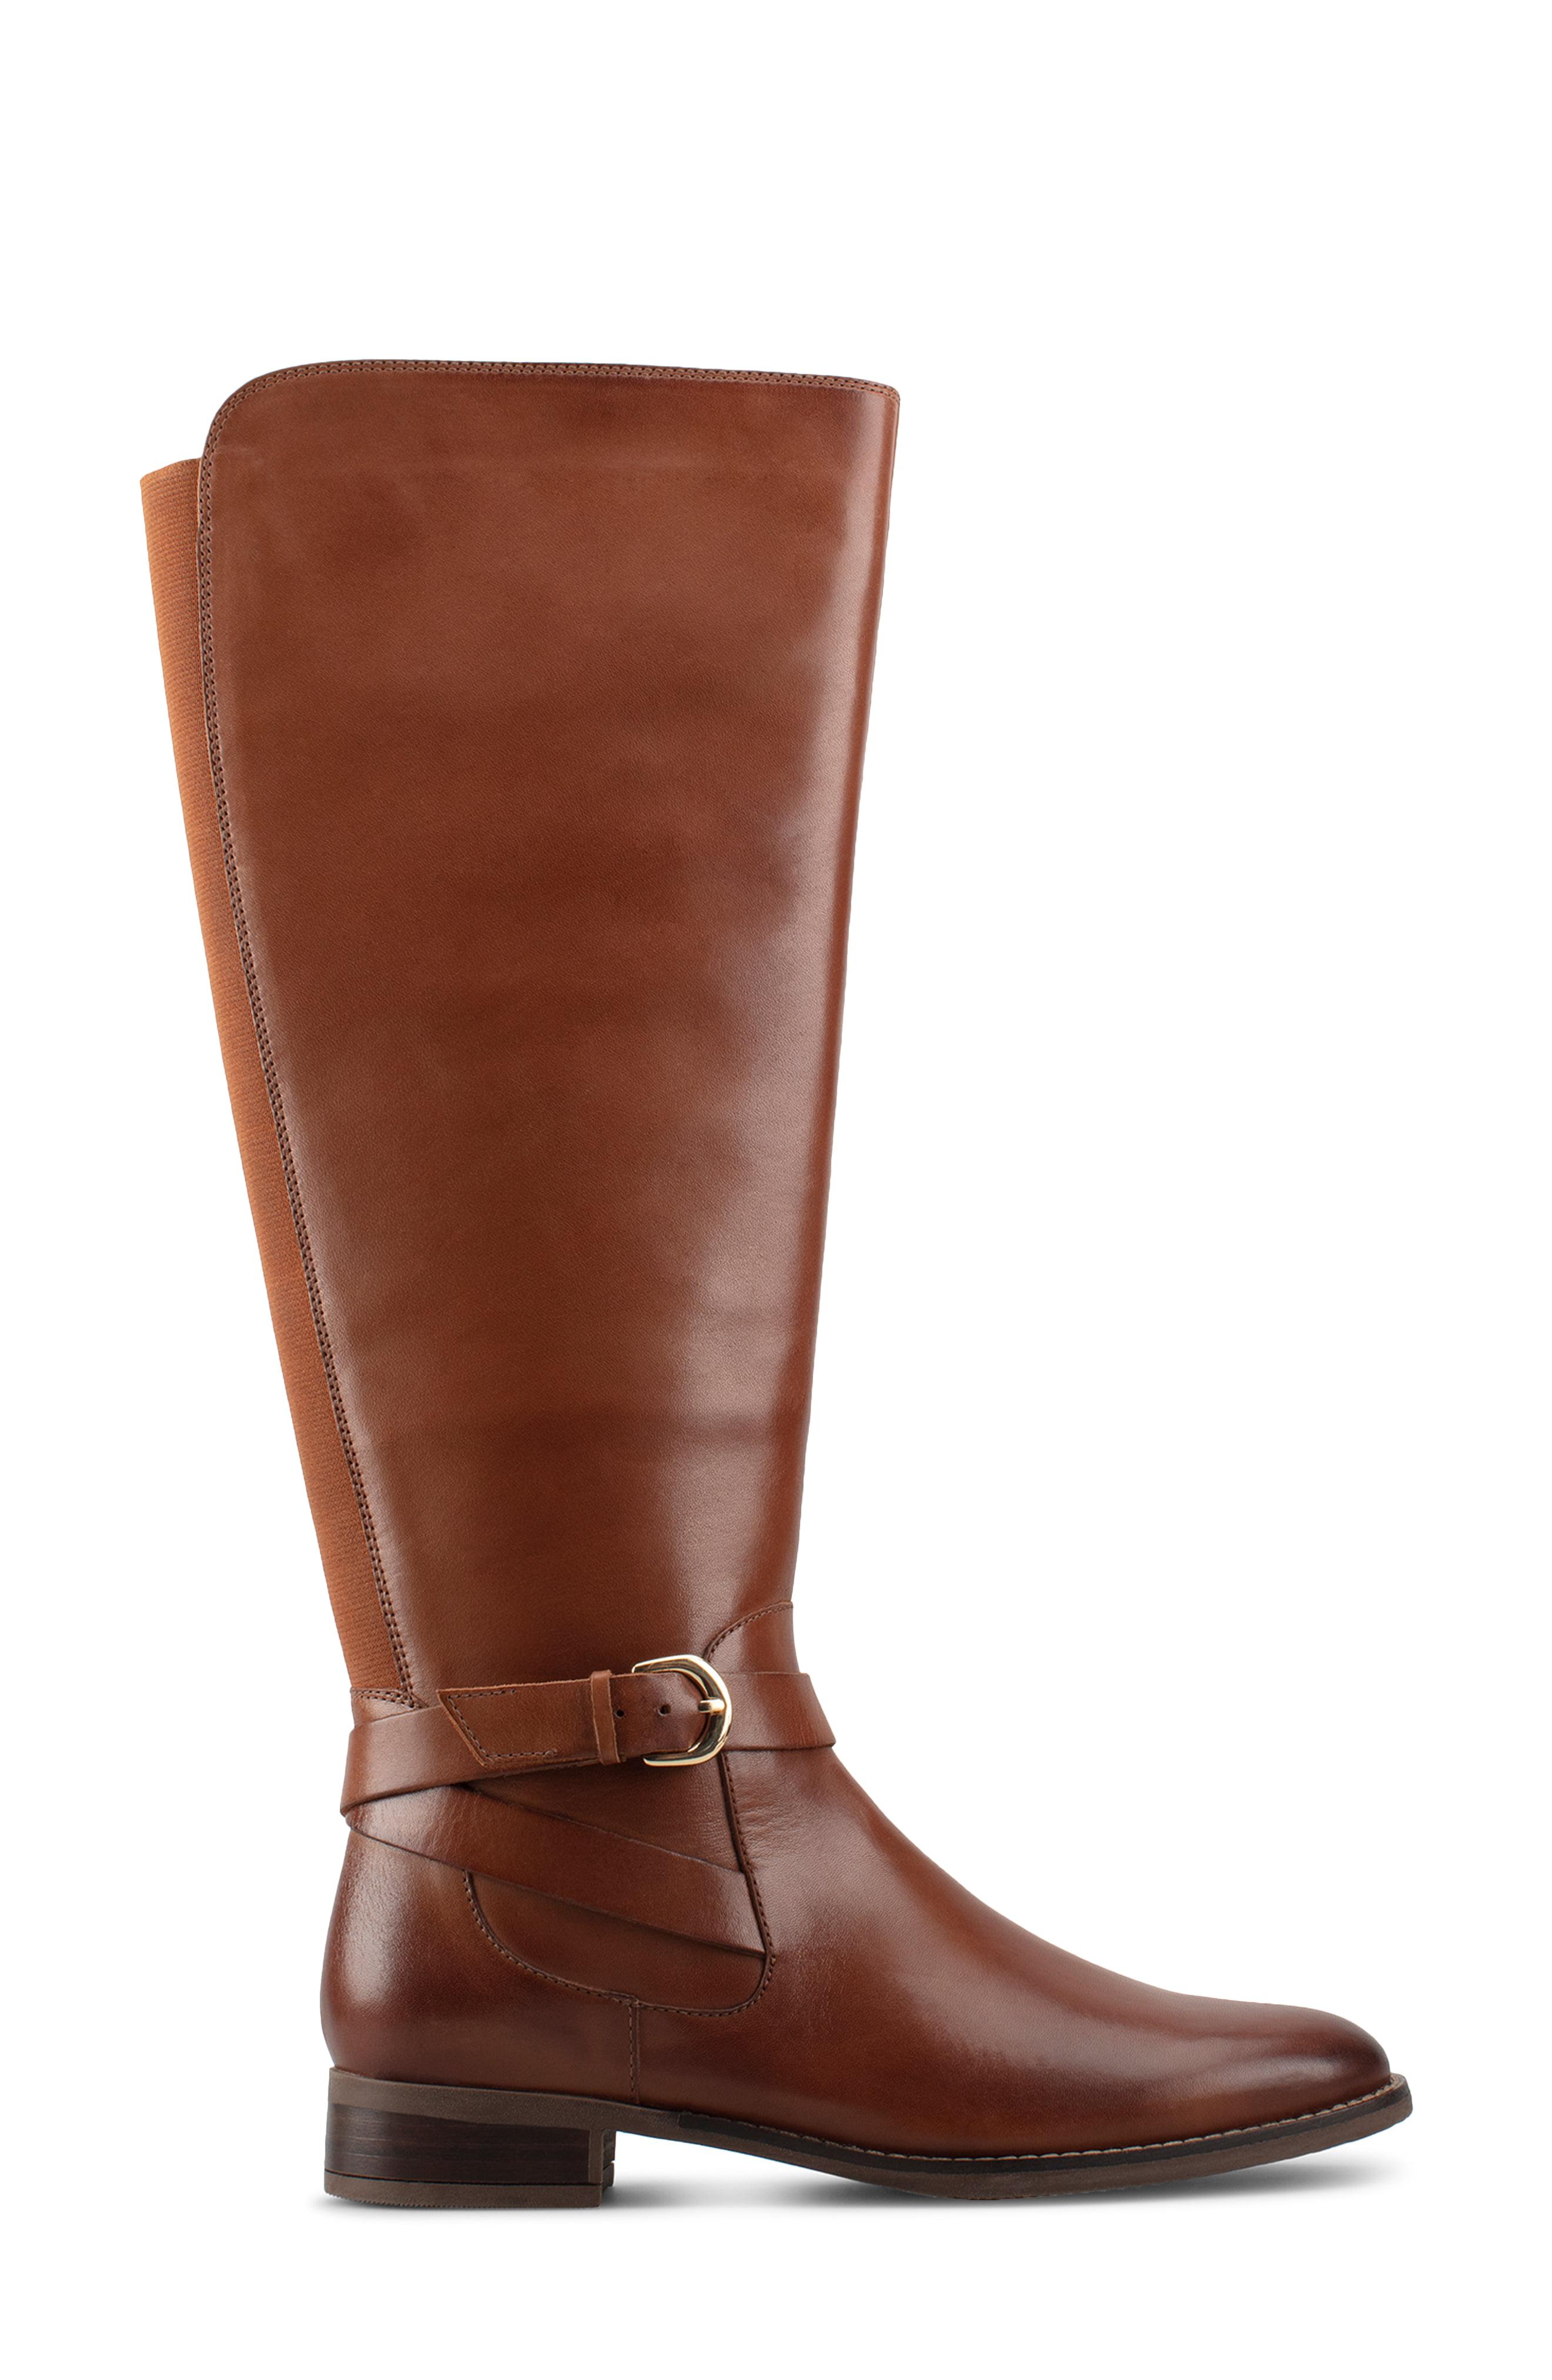 clarks tan leather riding boots